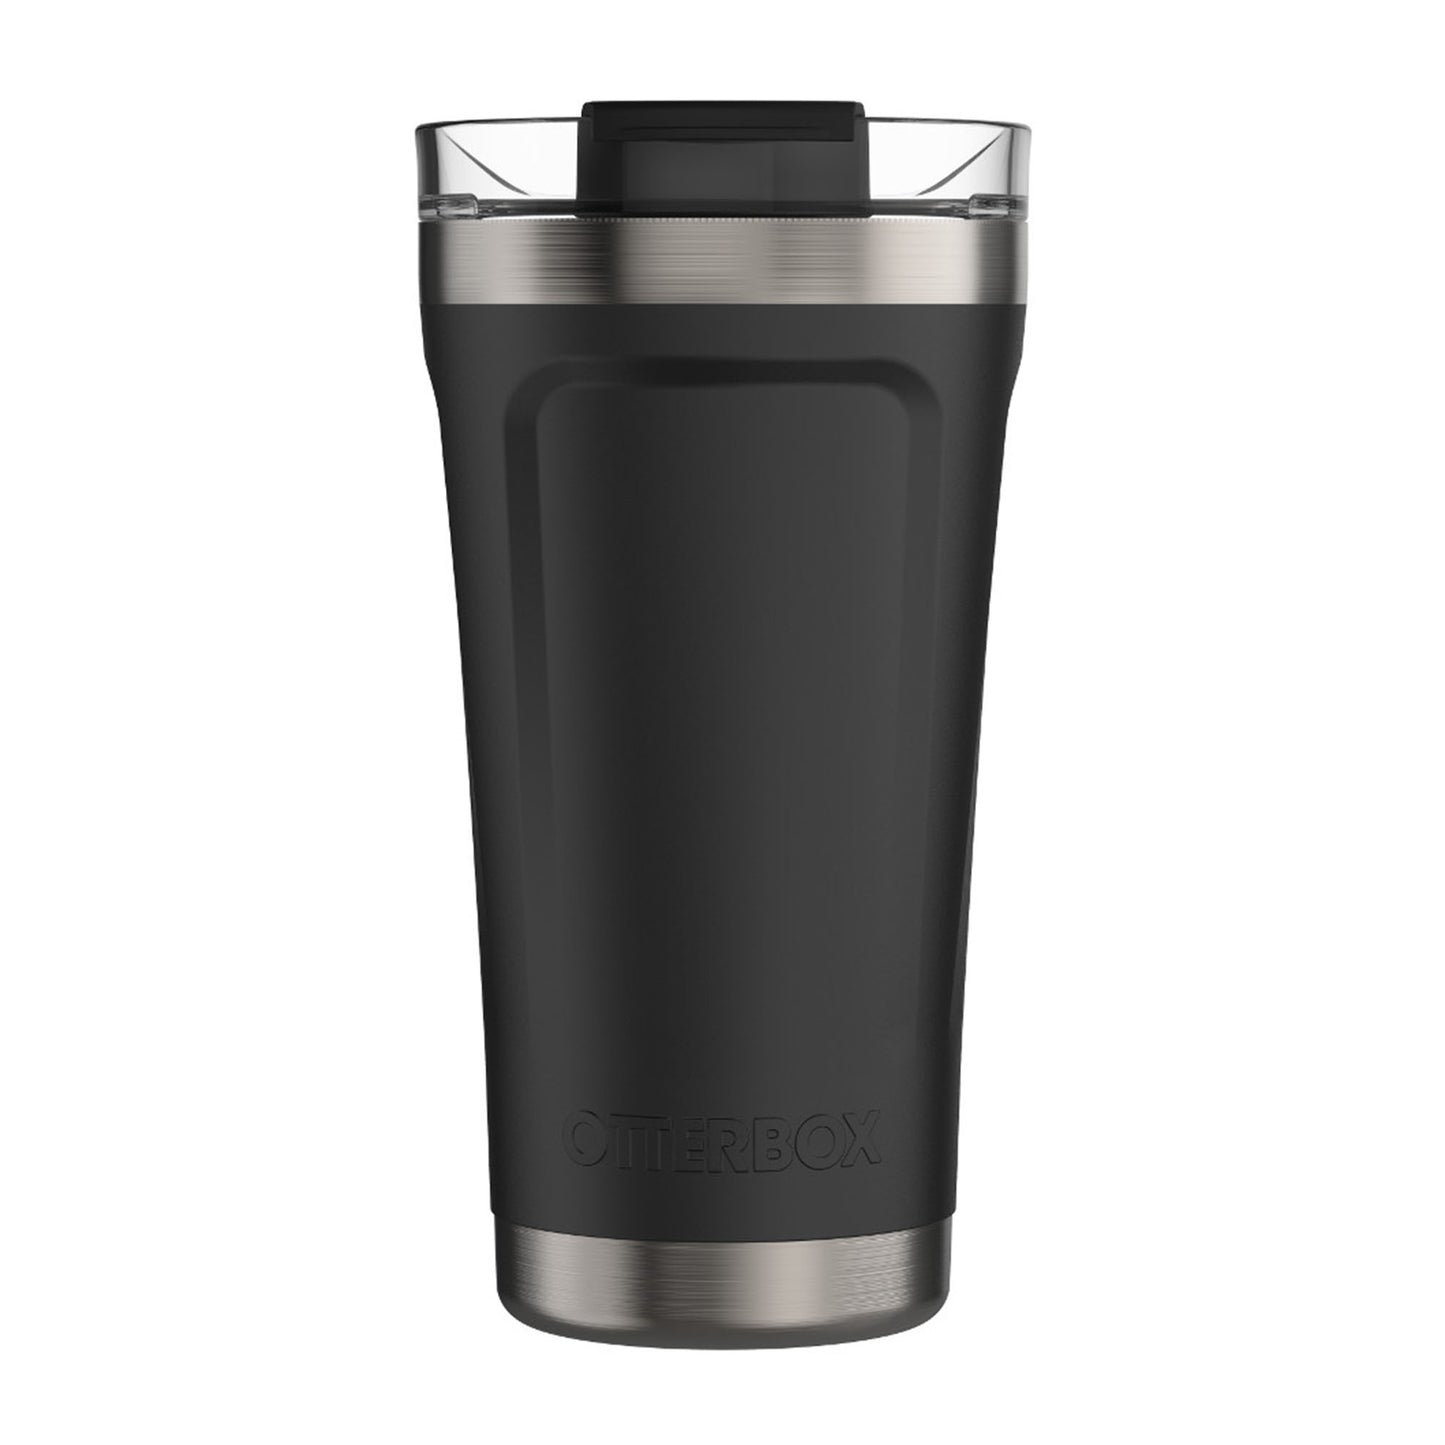 Otterbox Stainless Steel Elevation (Silver Panther) 16oz Tumbler w/Closed Lid - 15-04962